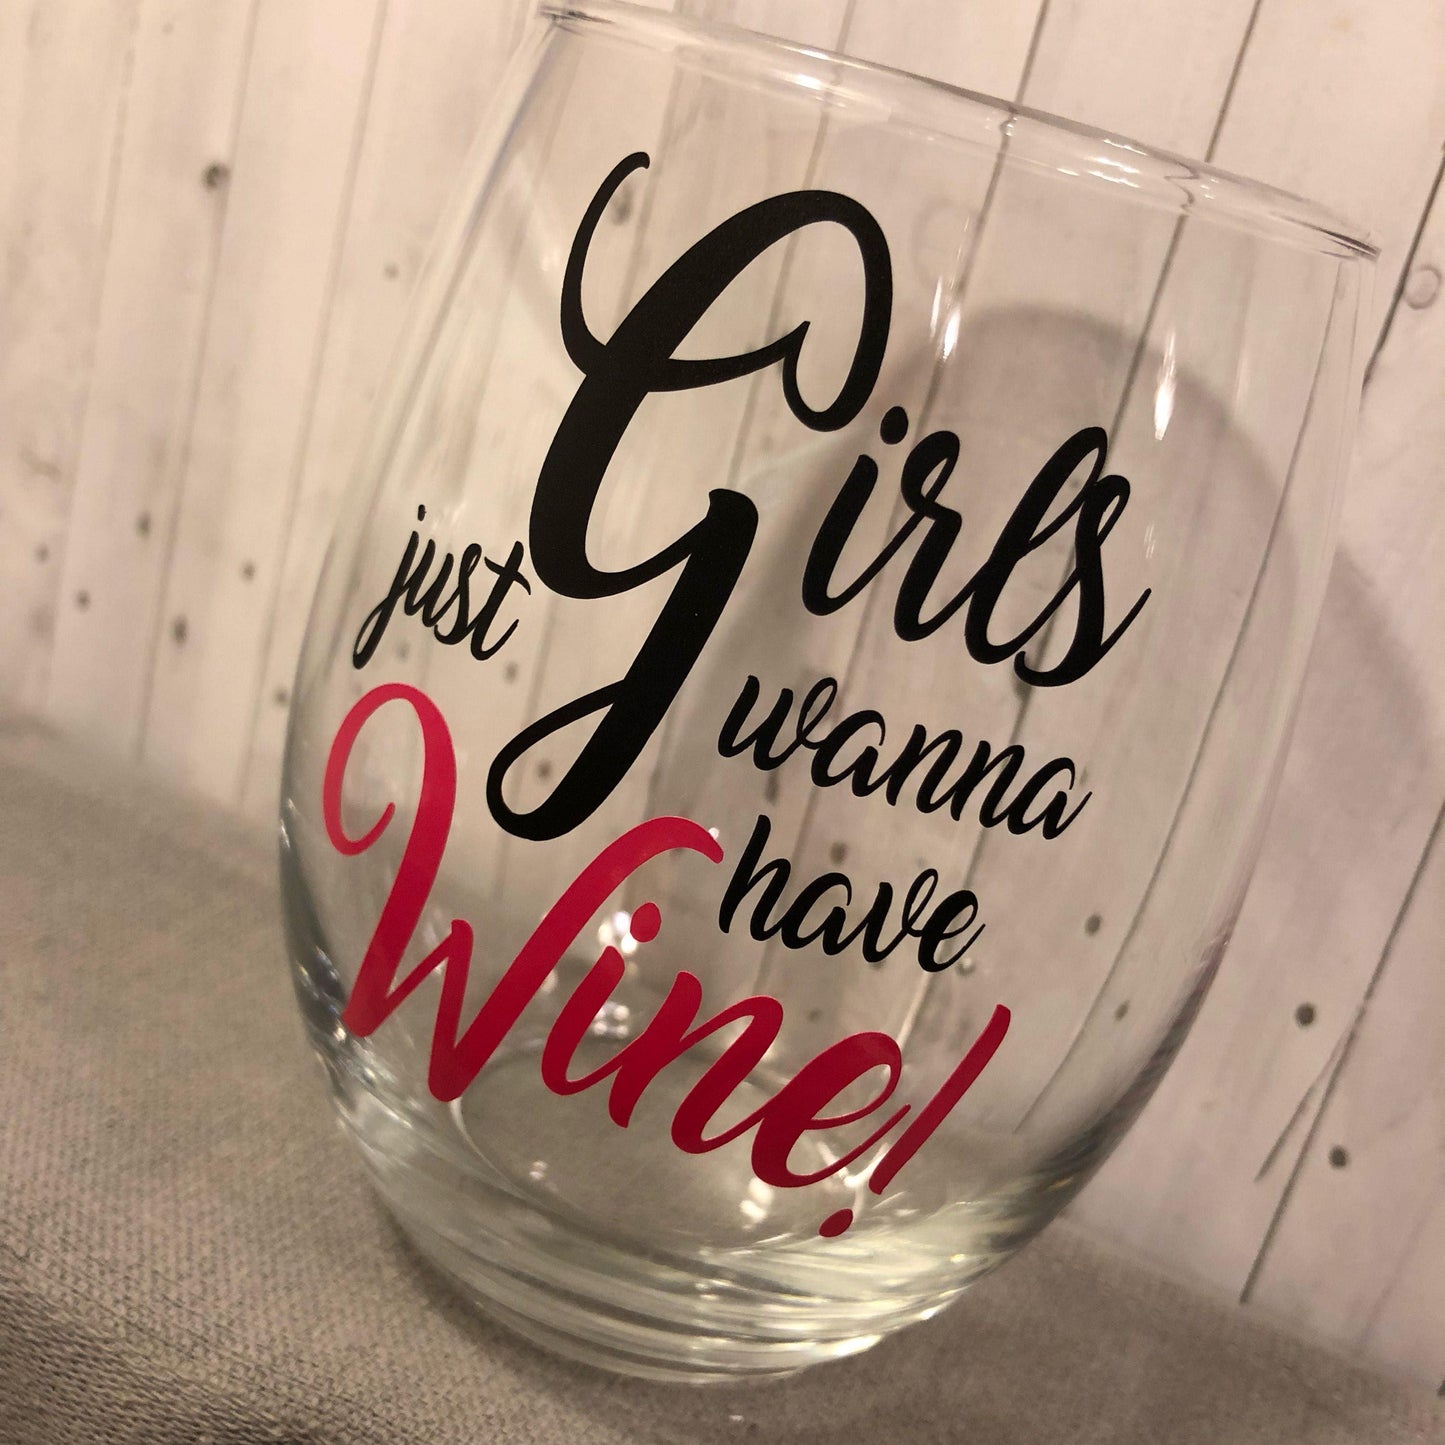 girls just wanna have wine, christmas gift, funny christmas glass, birthday gifts for her, gifts for her, funny gifts, funny wine glasses